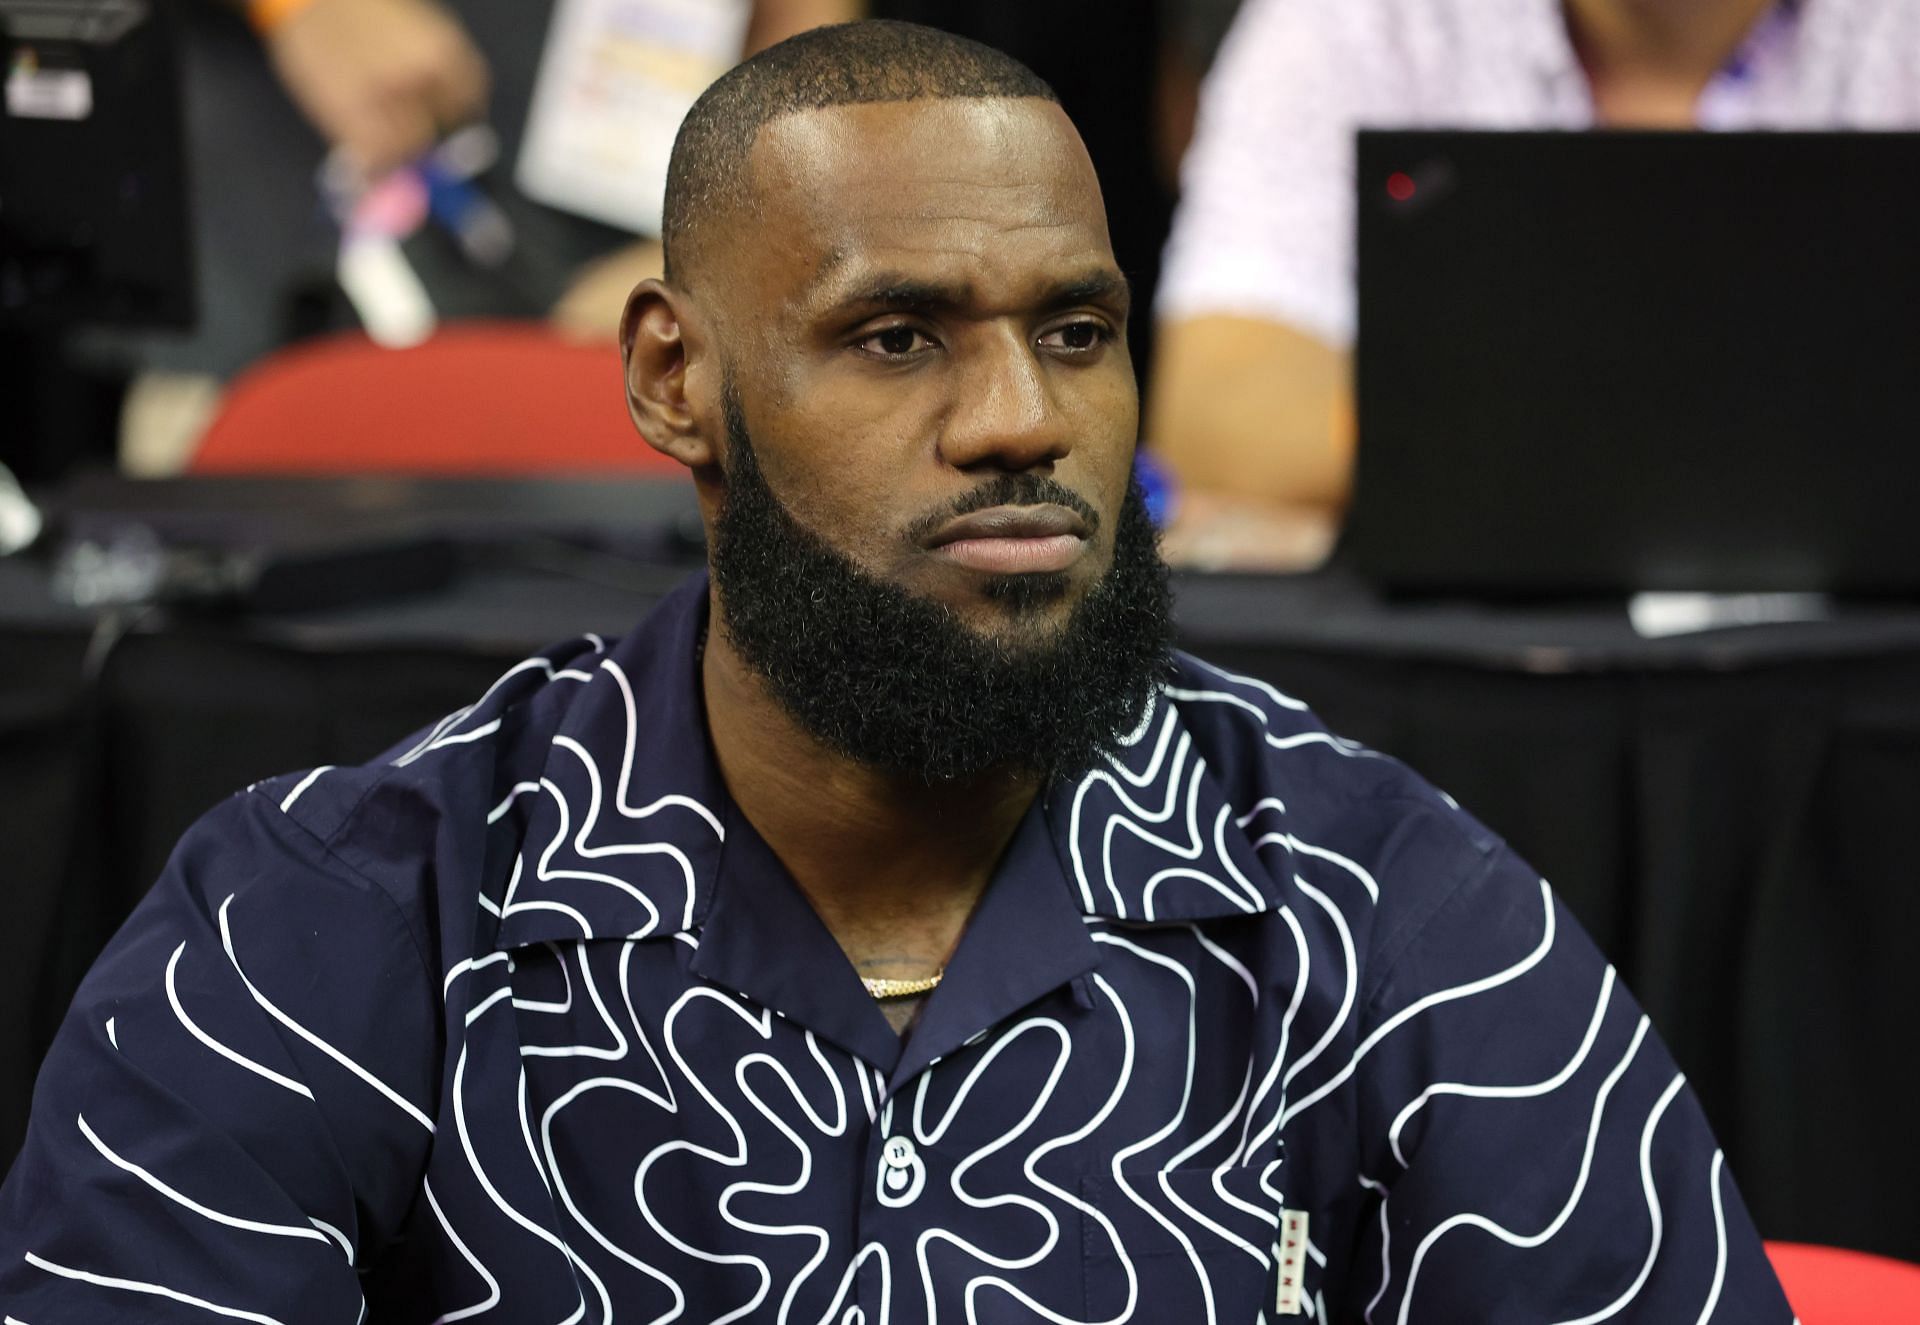 LeBron James of the LA Lakers attends a 2022 NBA Summer League game